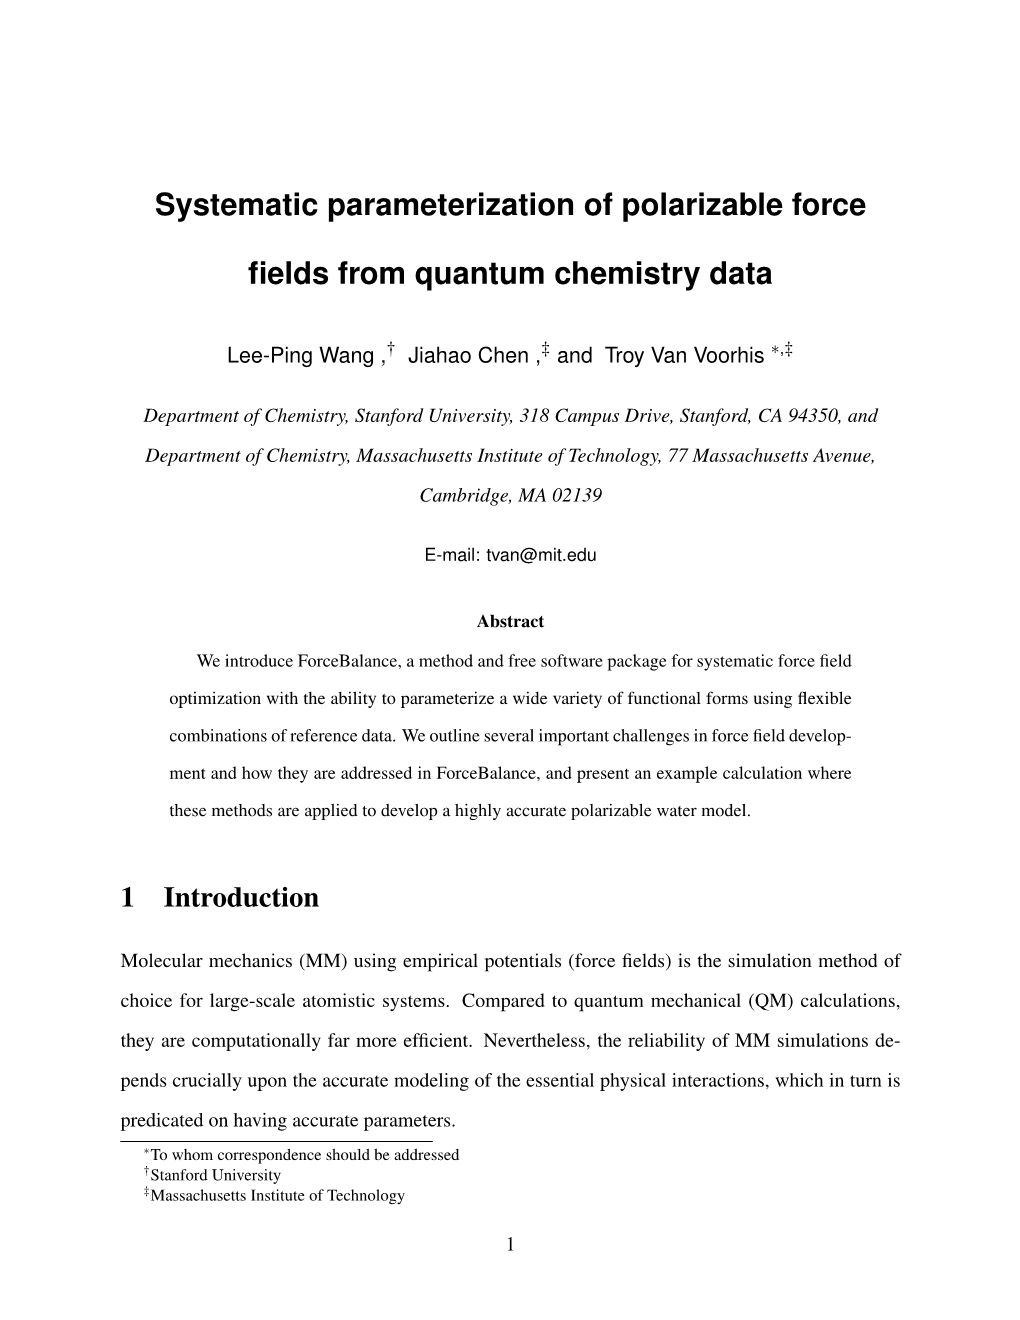 Systematic Parameterization of Polarizable Force Fields From